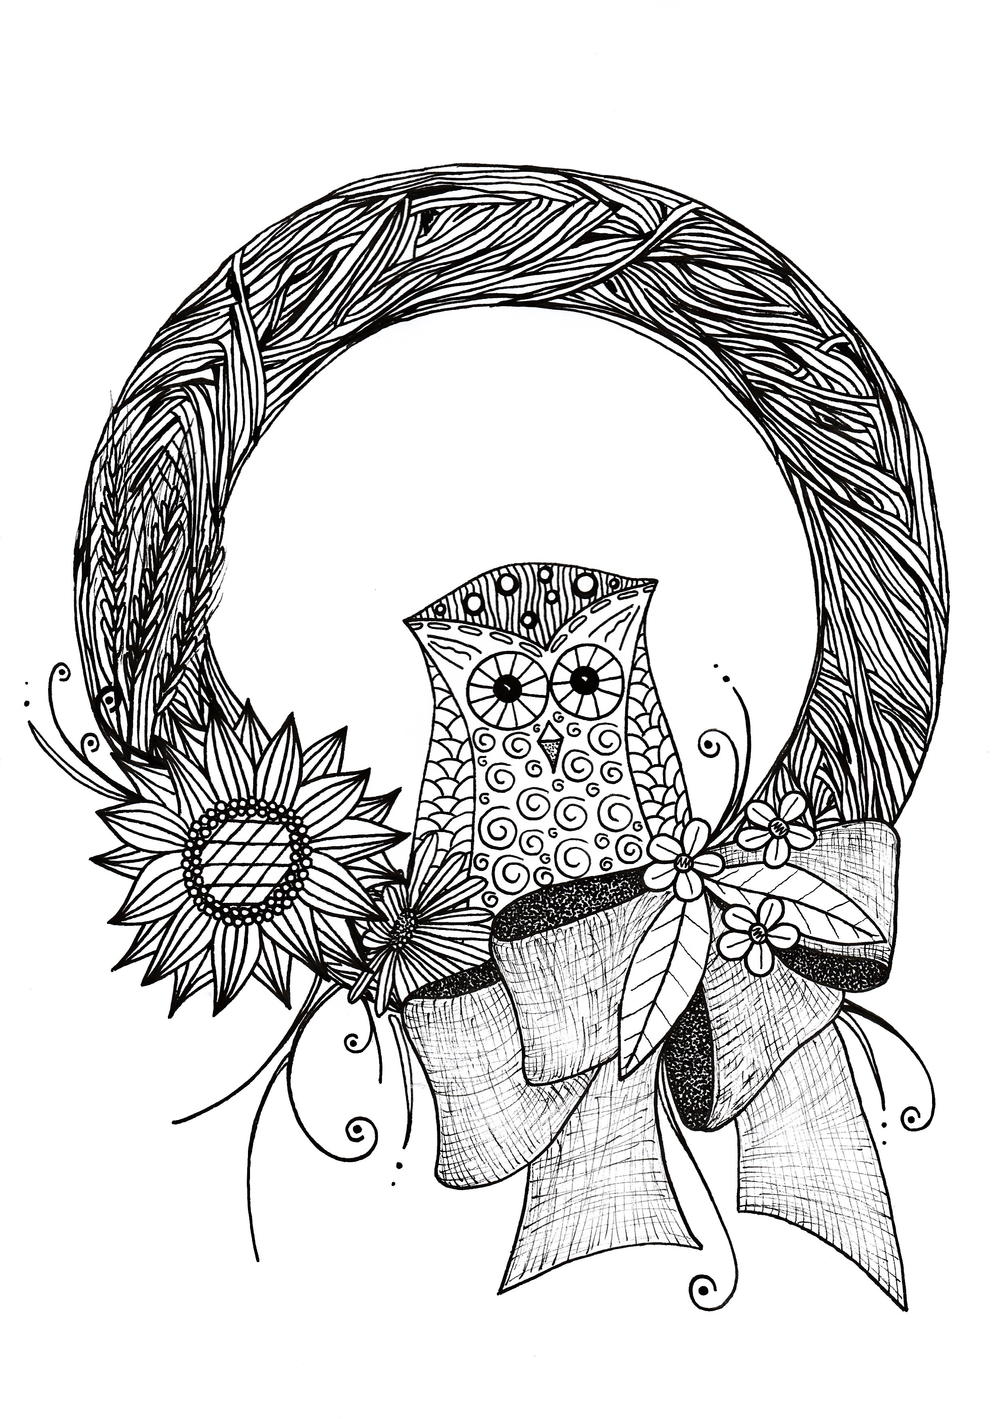 Download Intricate Fall Wreath Adult Coloring Page | FaveCrafts.com